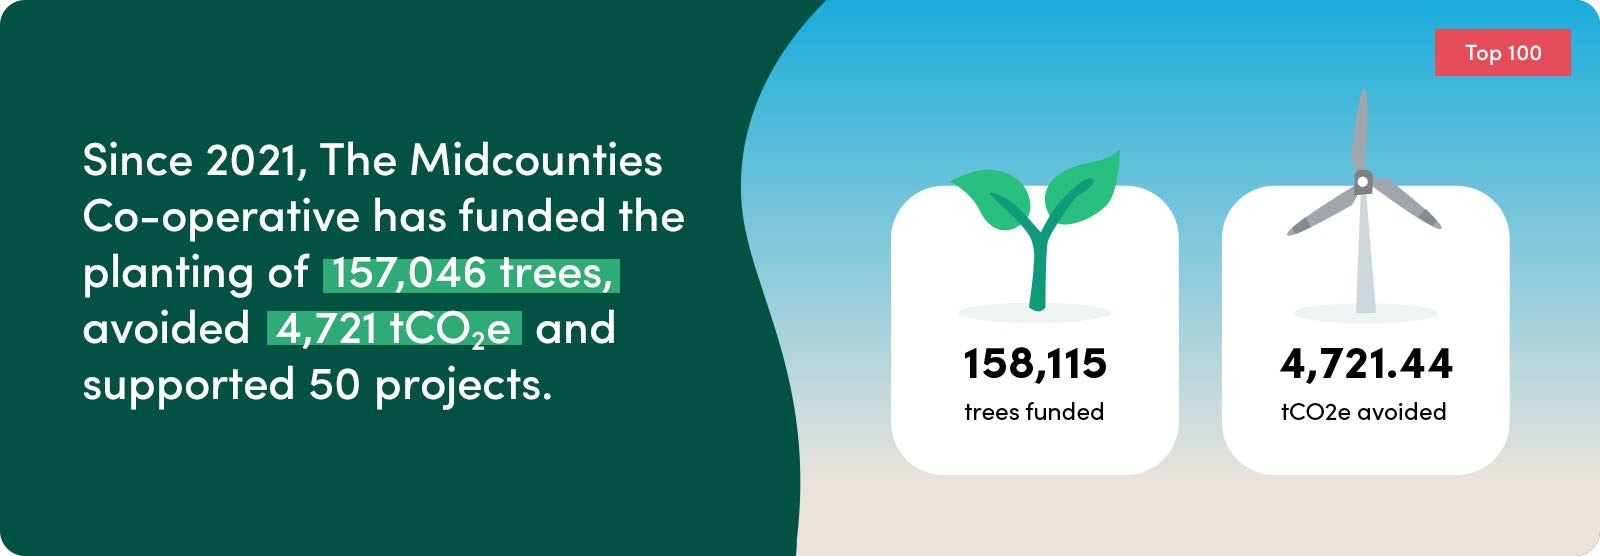 Since 2021, The Midcounties Co-operative has funded the planting of 157,046 trees, avoided 4,721 tCO2e and supported 50 projects.